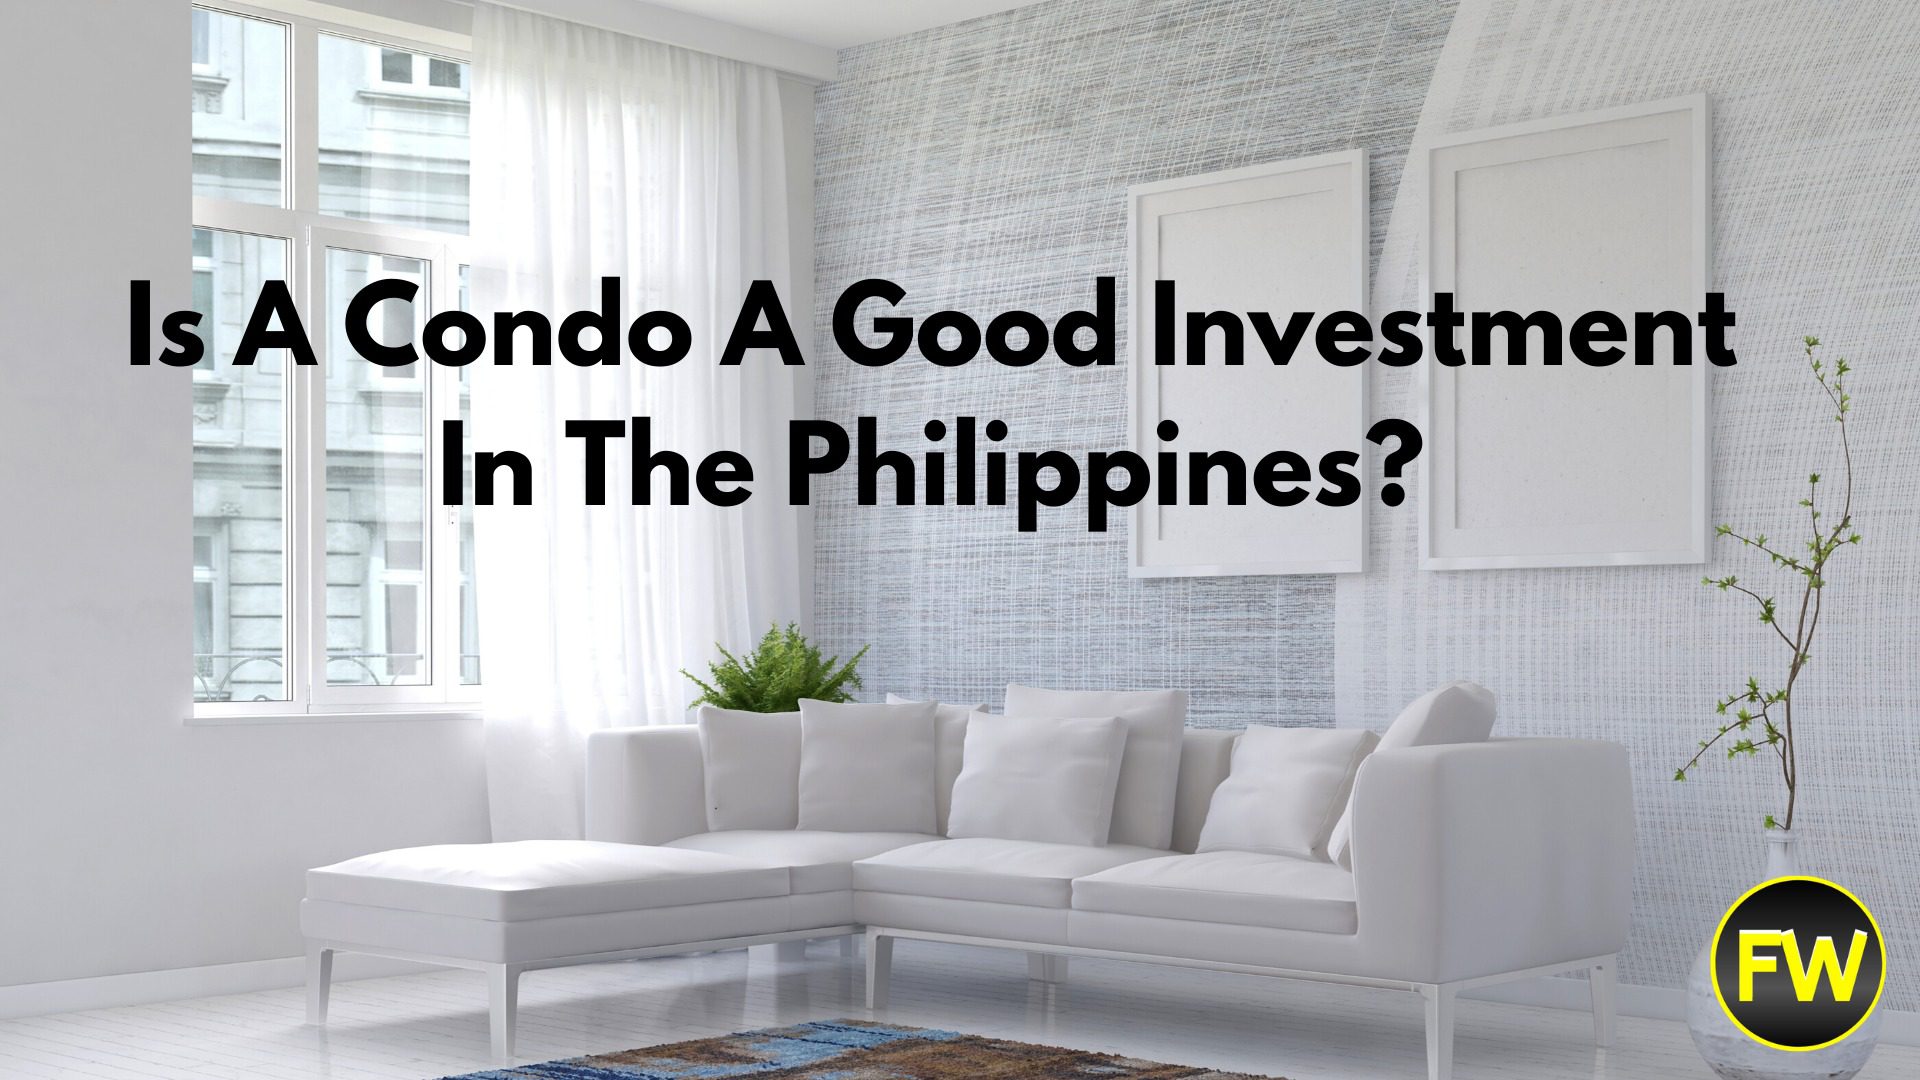 Is A Condo A Good Investment In The Philippines